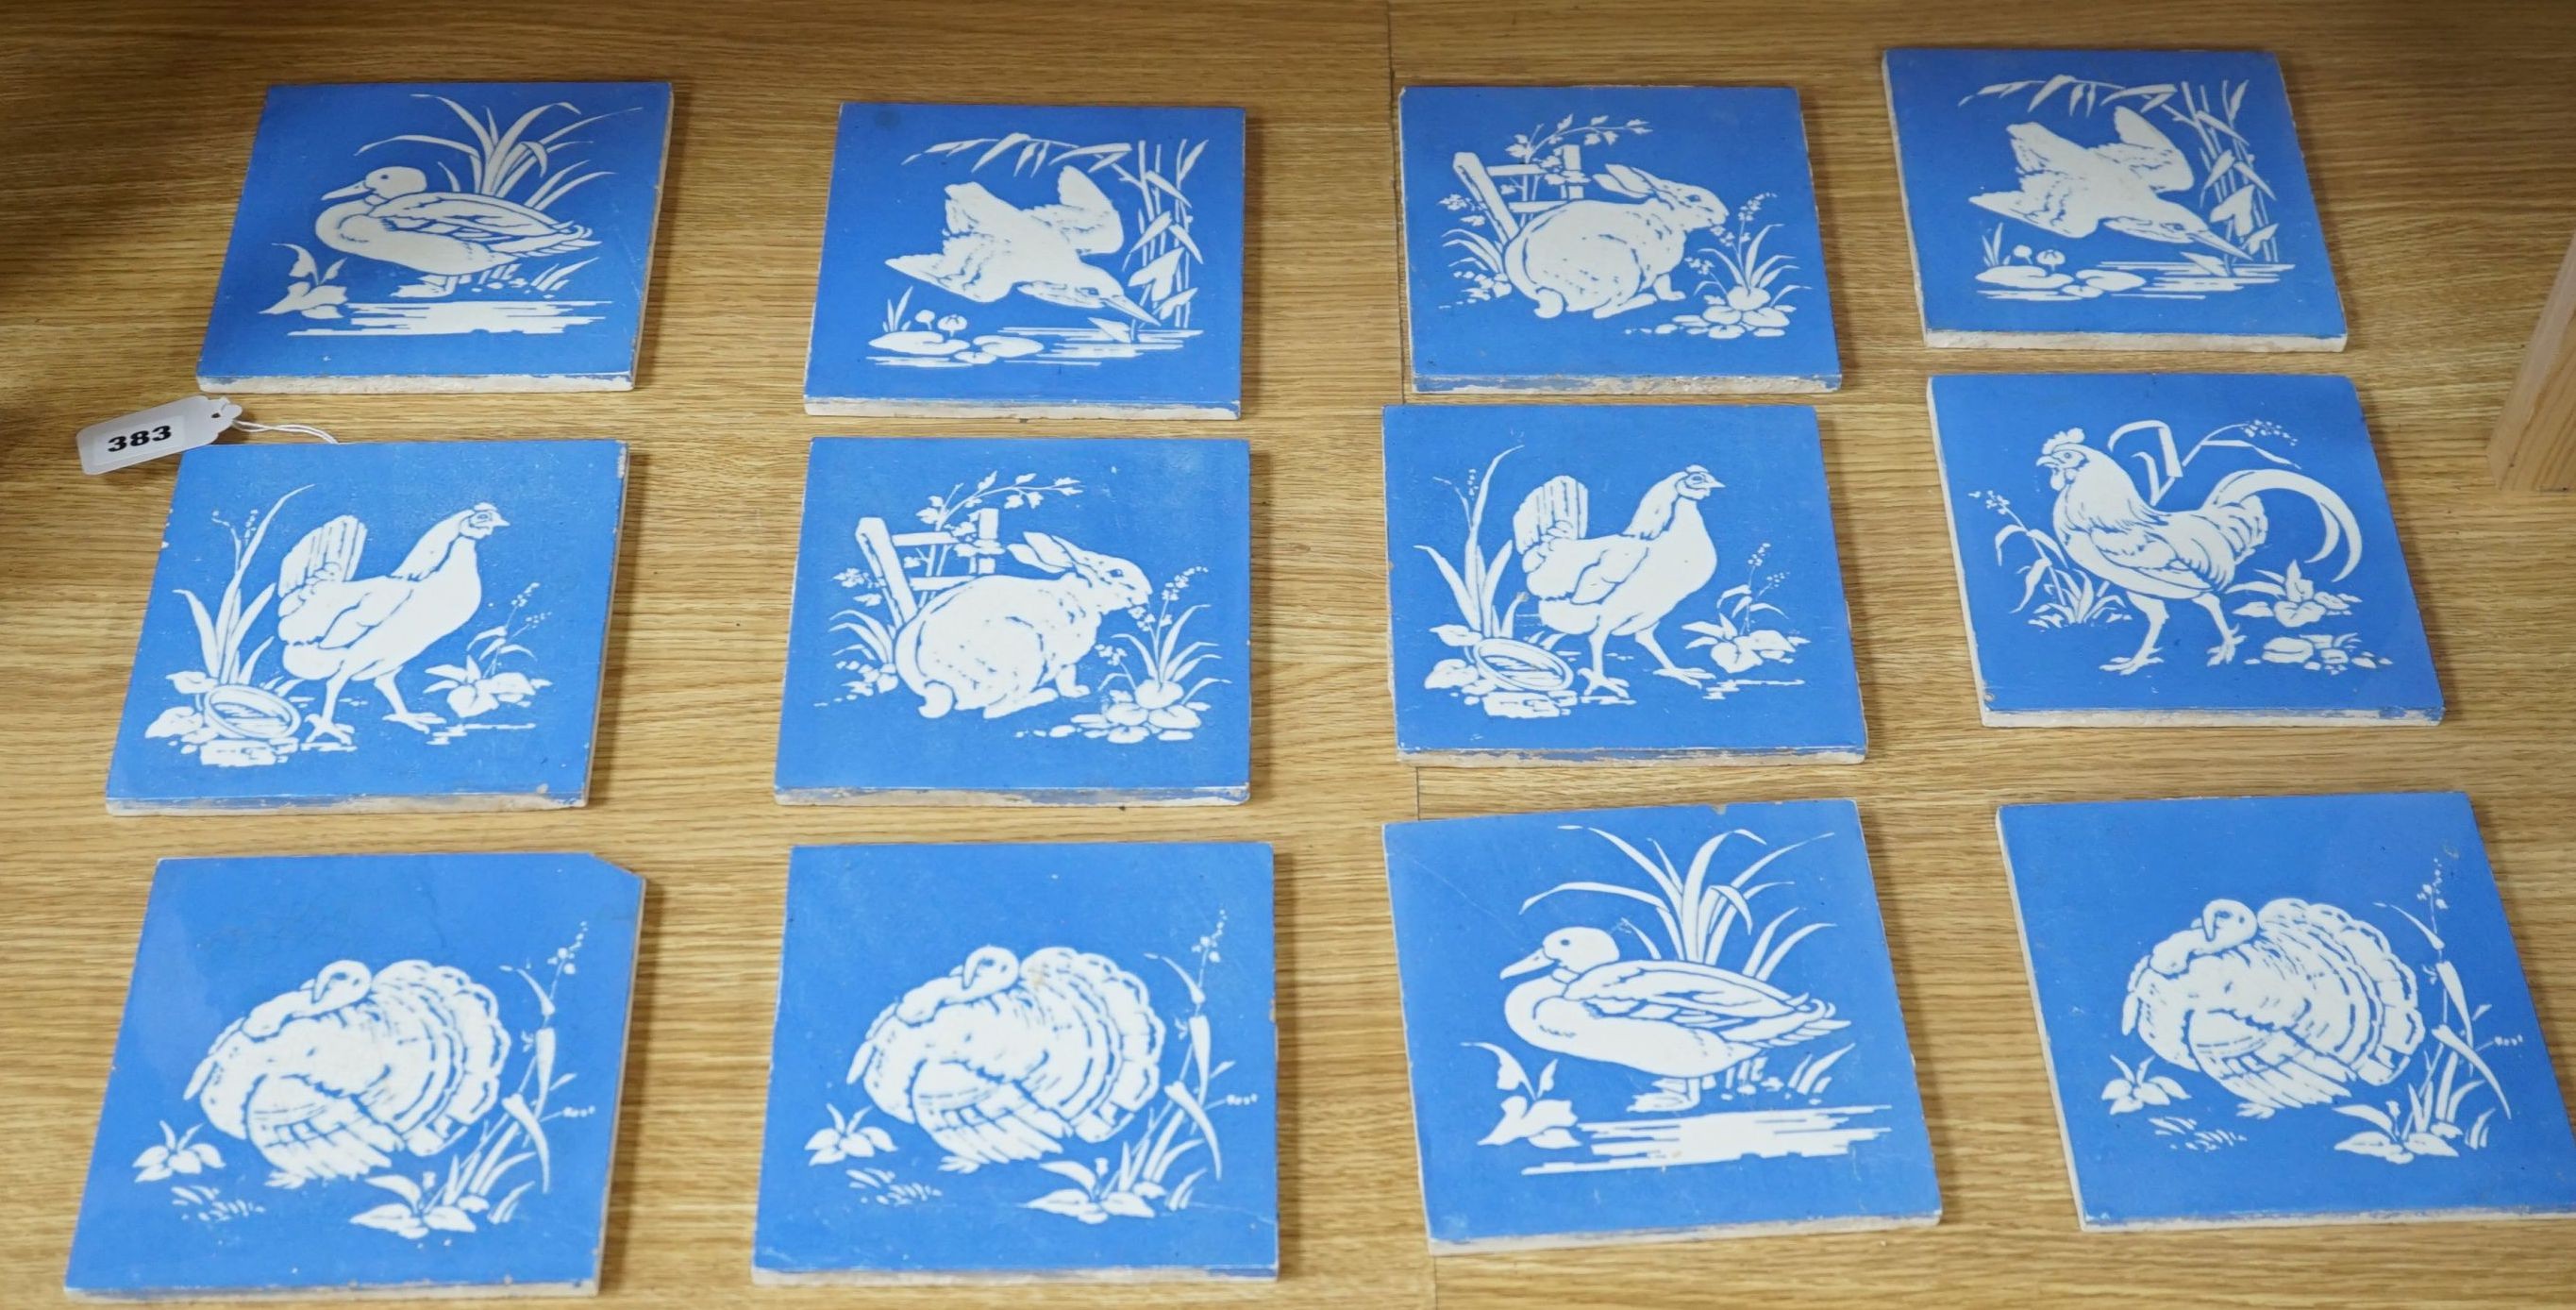 A collection of twelve Mintons China Works blue and white bird tiles, 15cms x 15cms square (each tile).